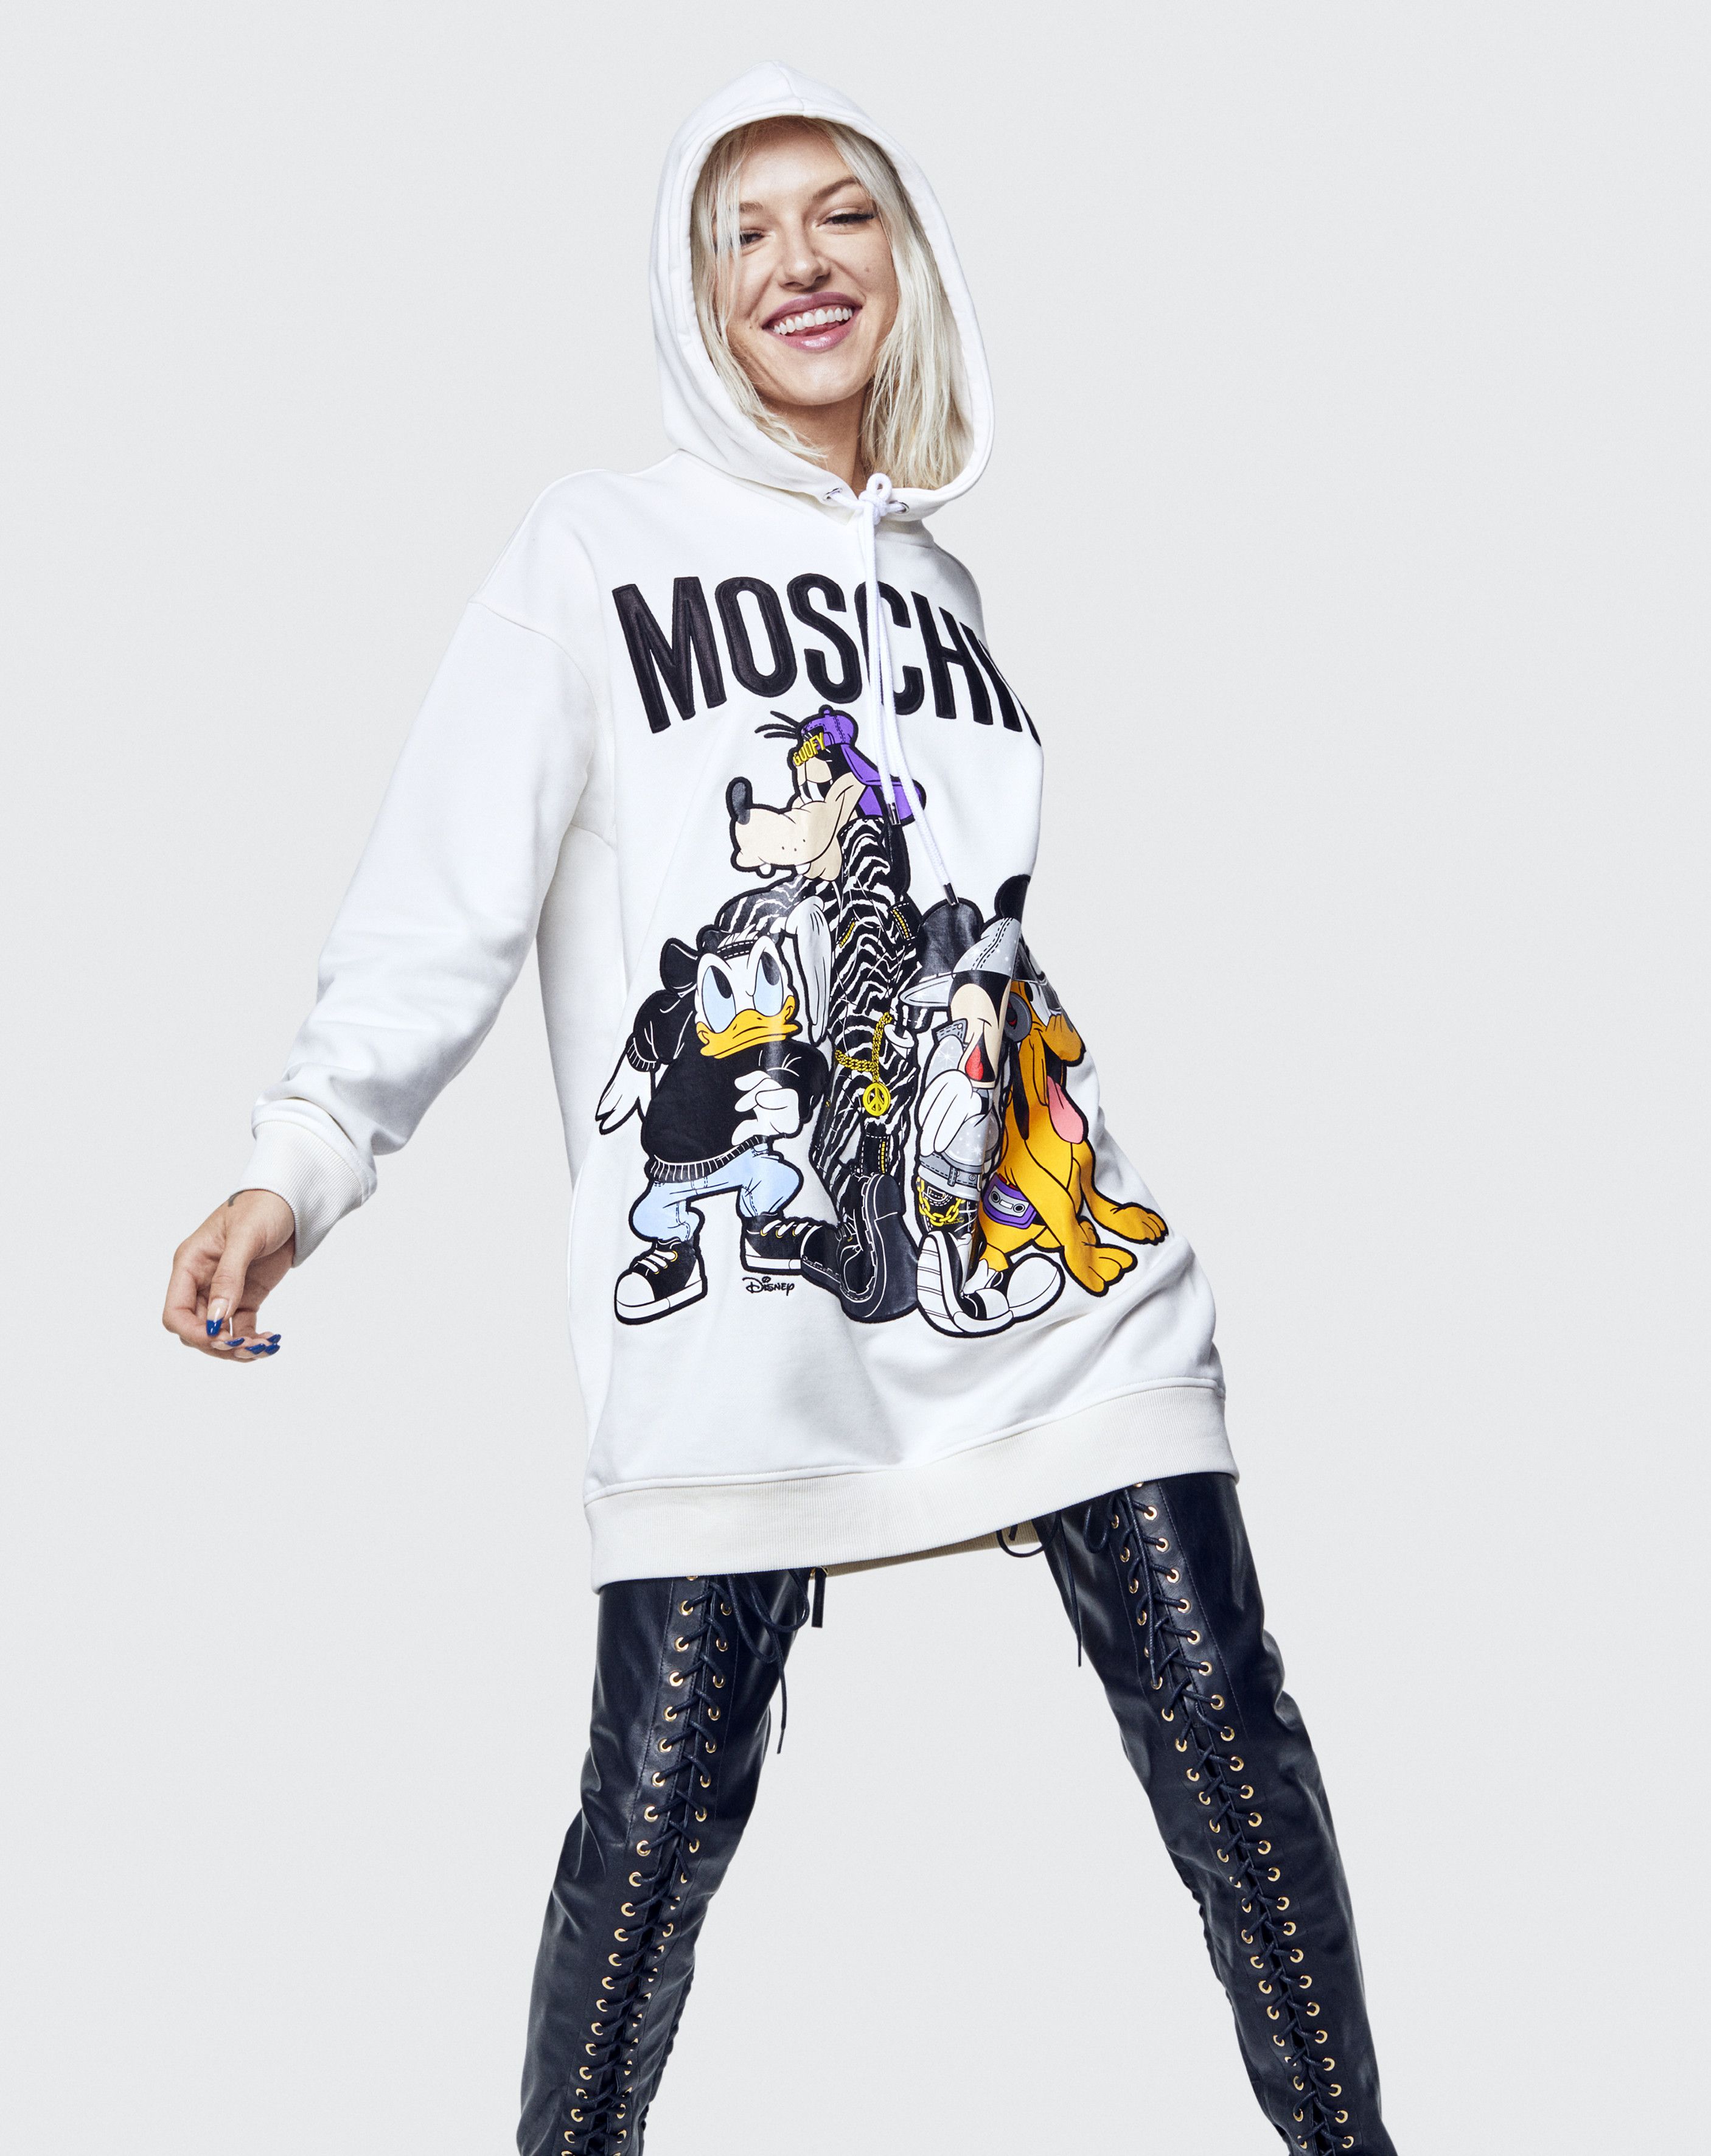 See Every Look in the Moschino x H&M Collection